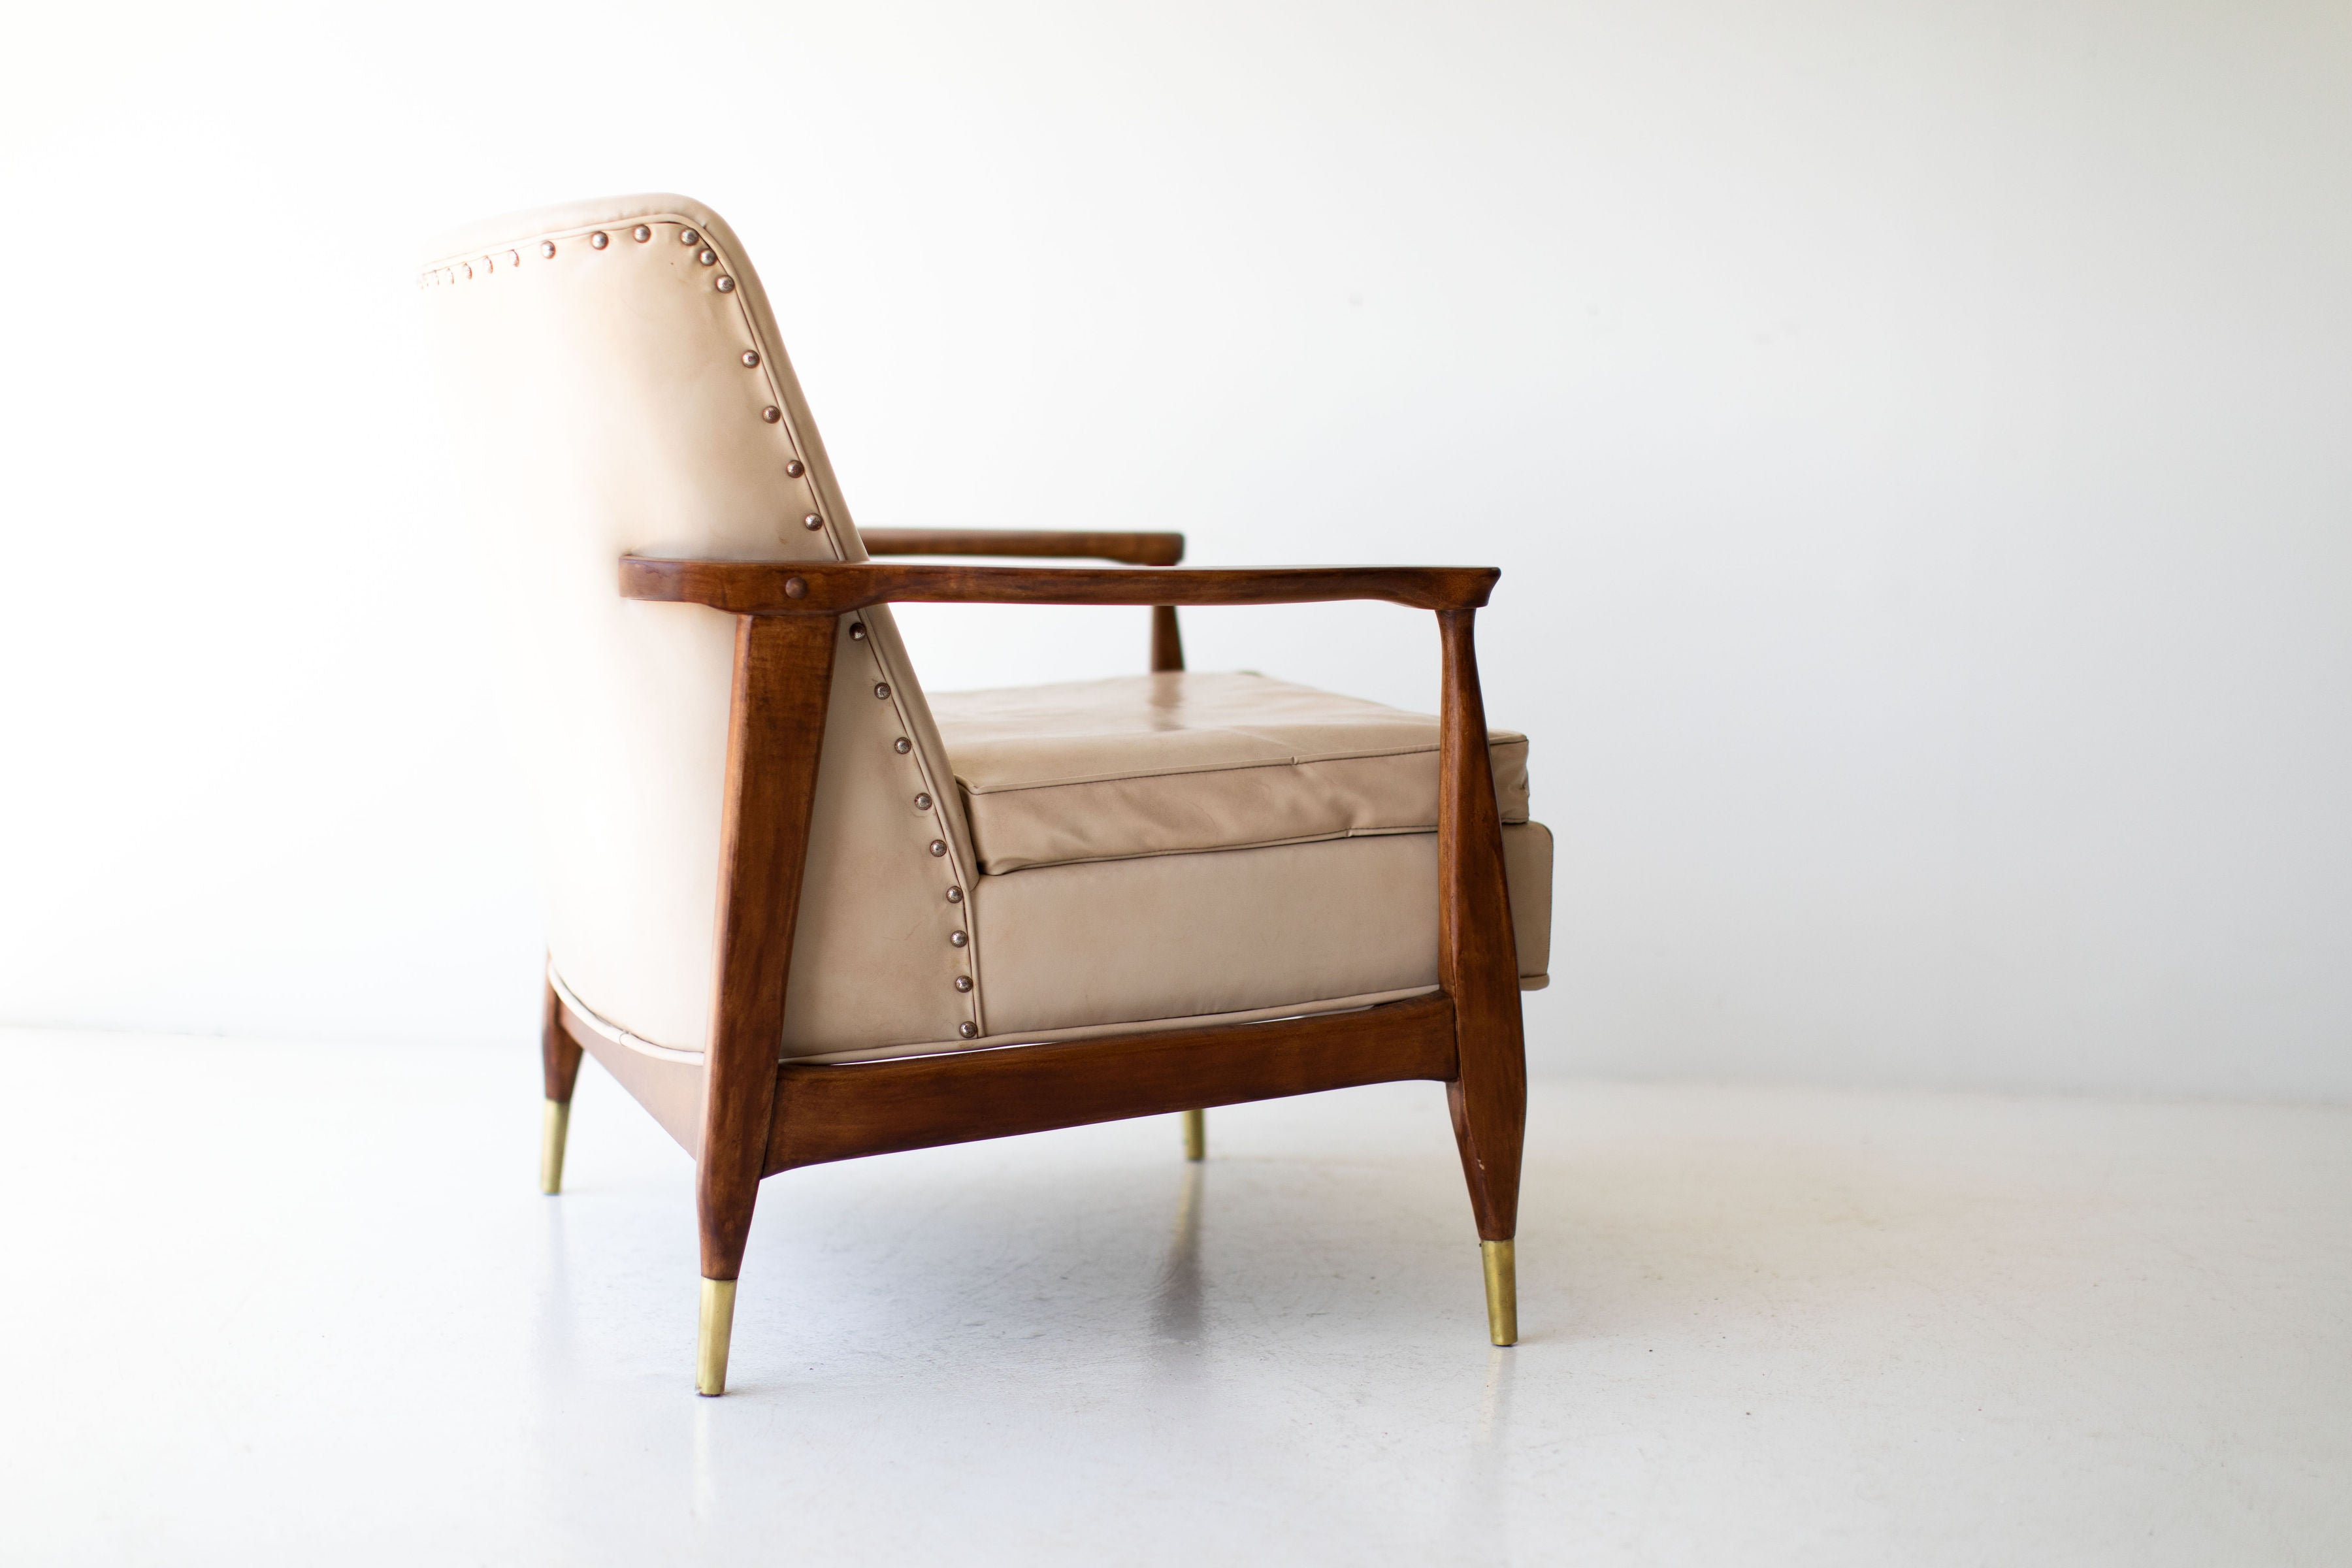 Lawrence Peabody Lounge Chair for Nemschoff